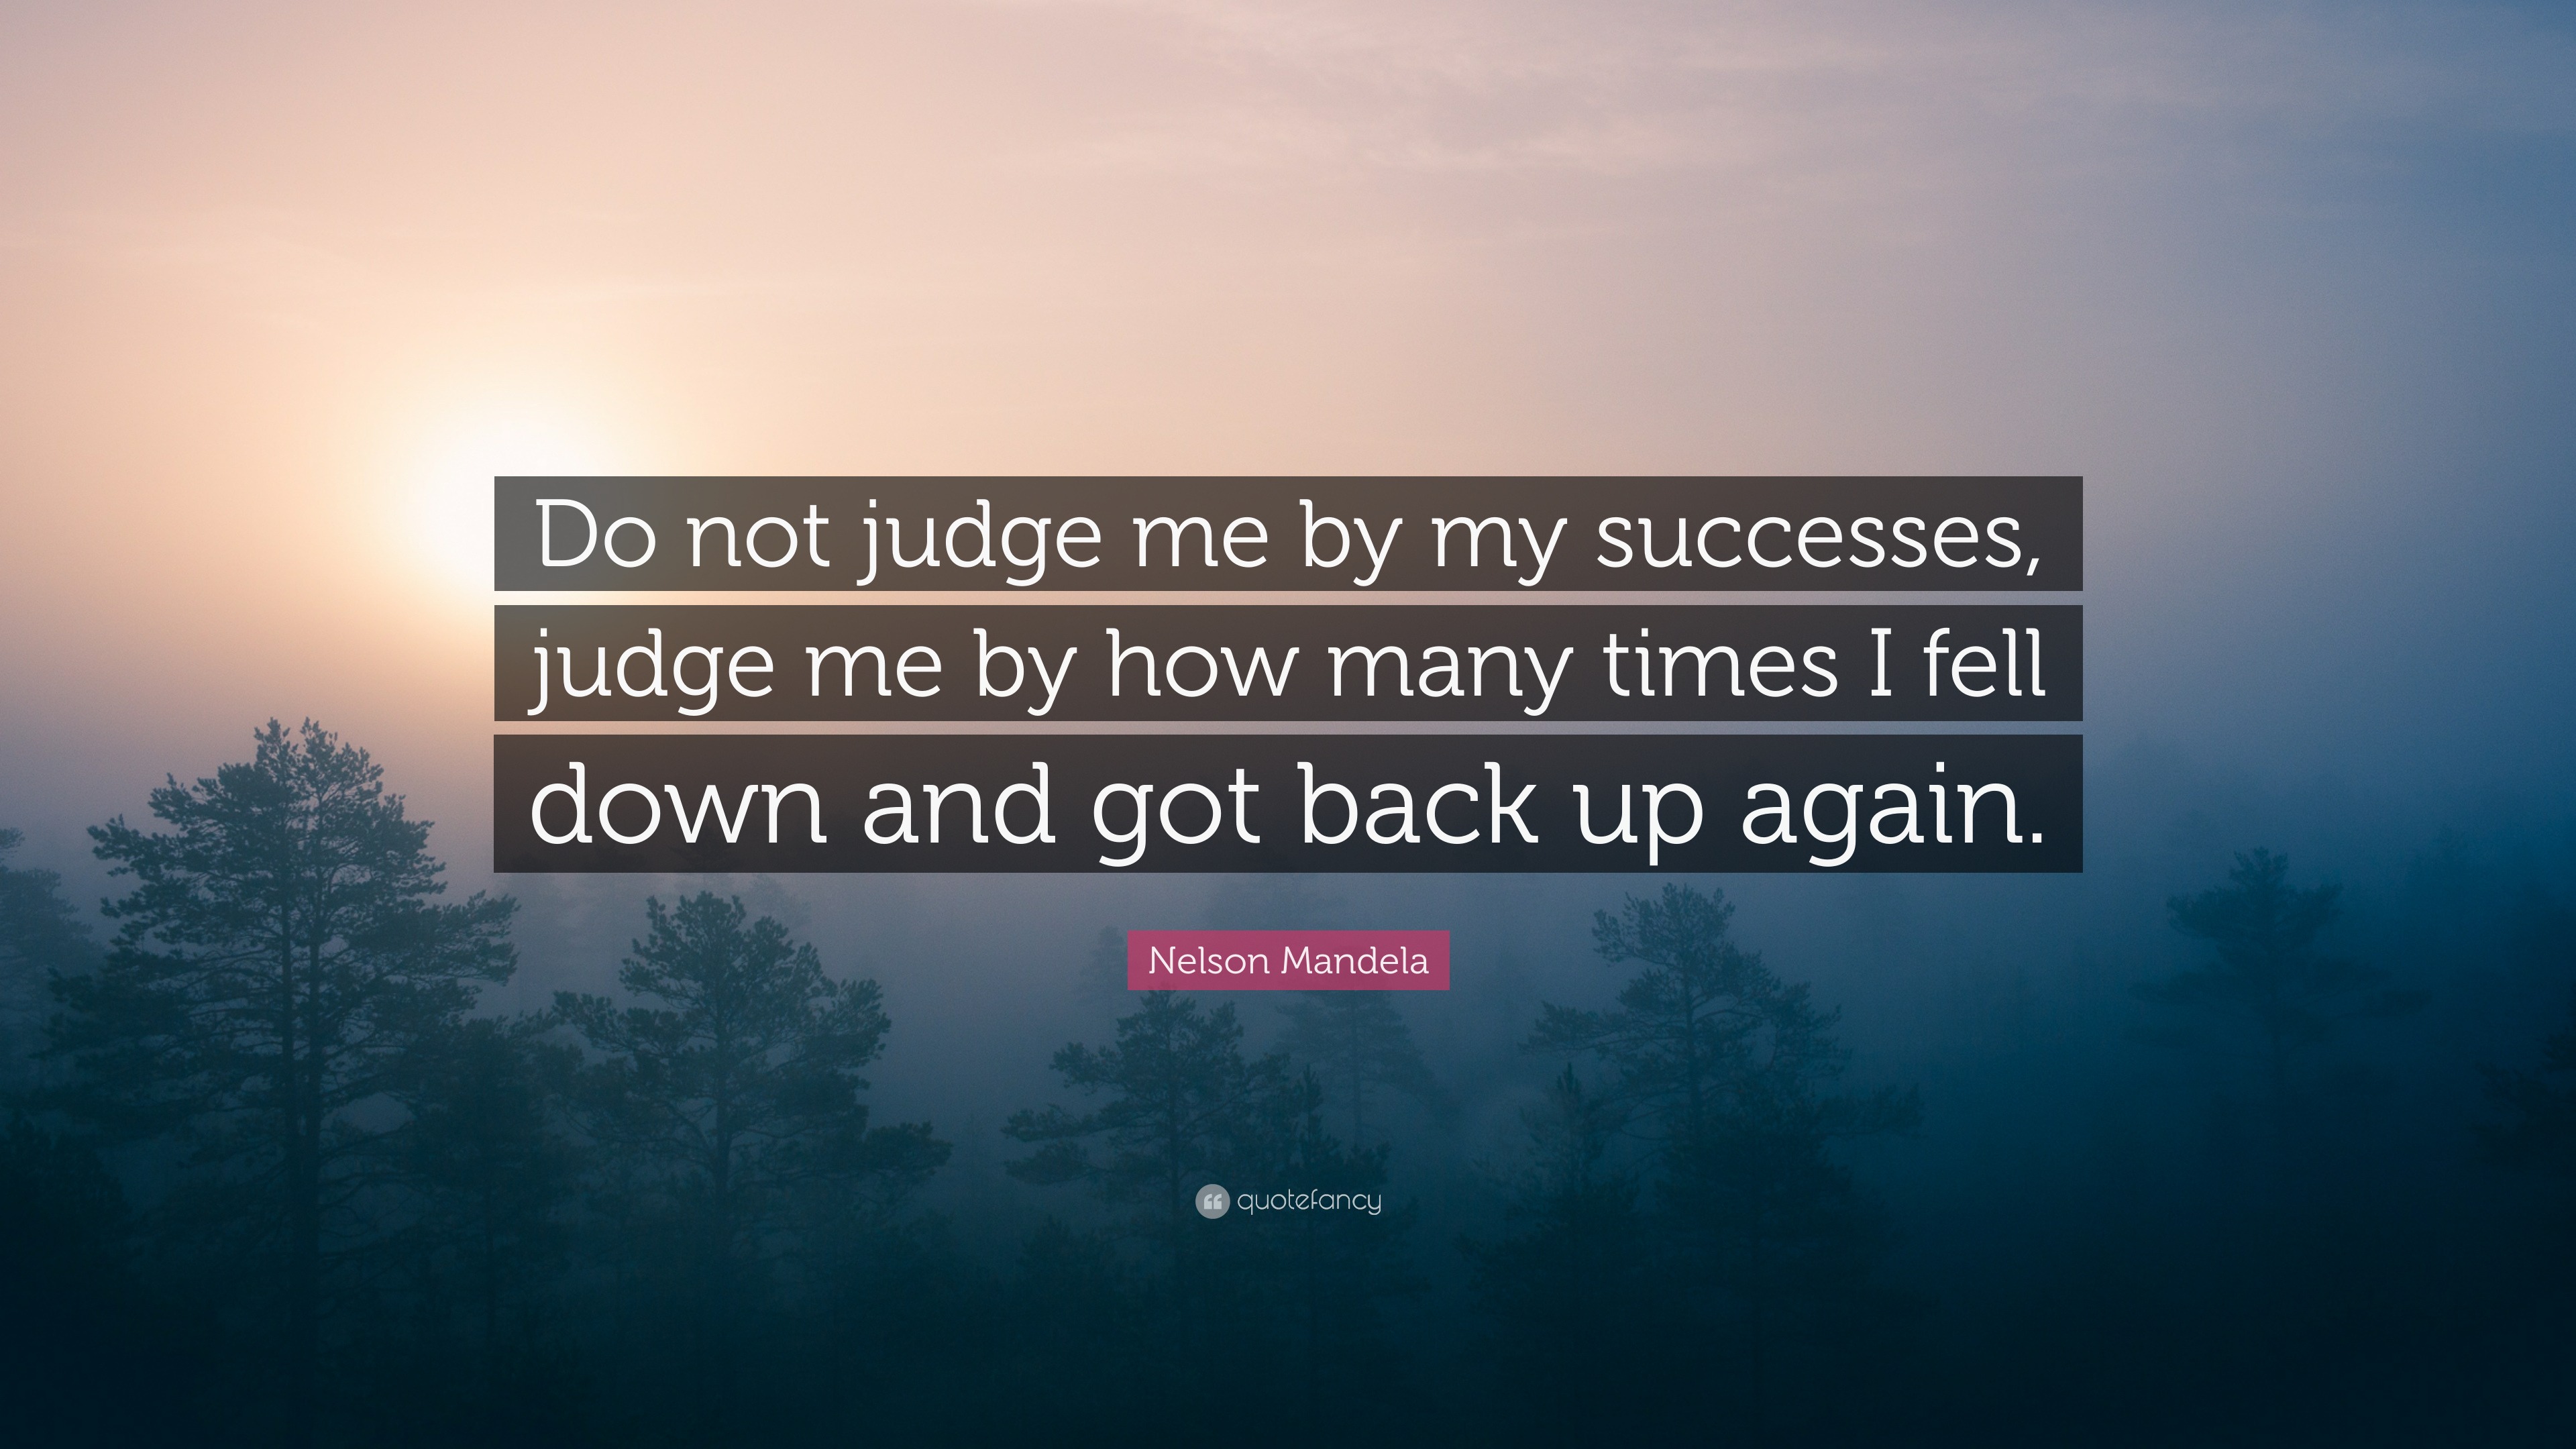 Nelson Mandela Quote “do Not Judge Me By My Successes Judge Me By How Many Times I Fell Down